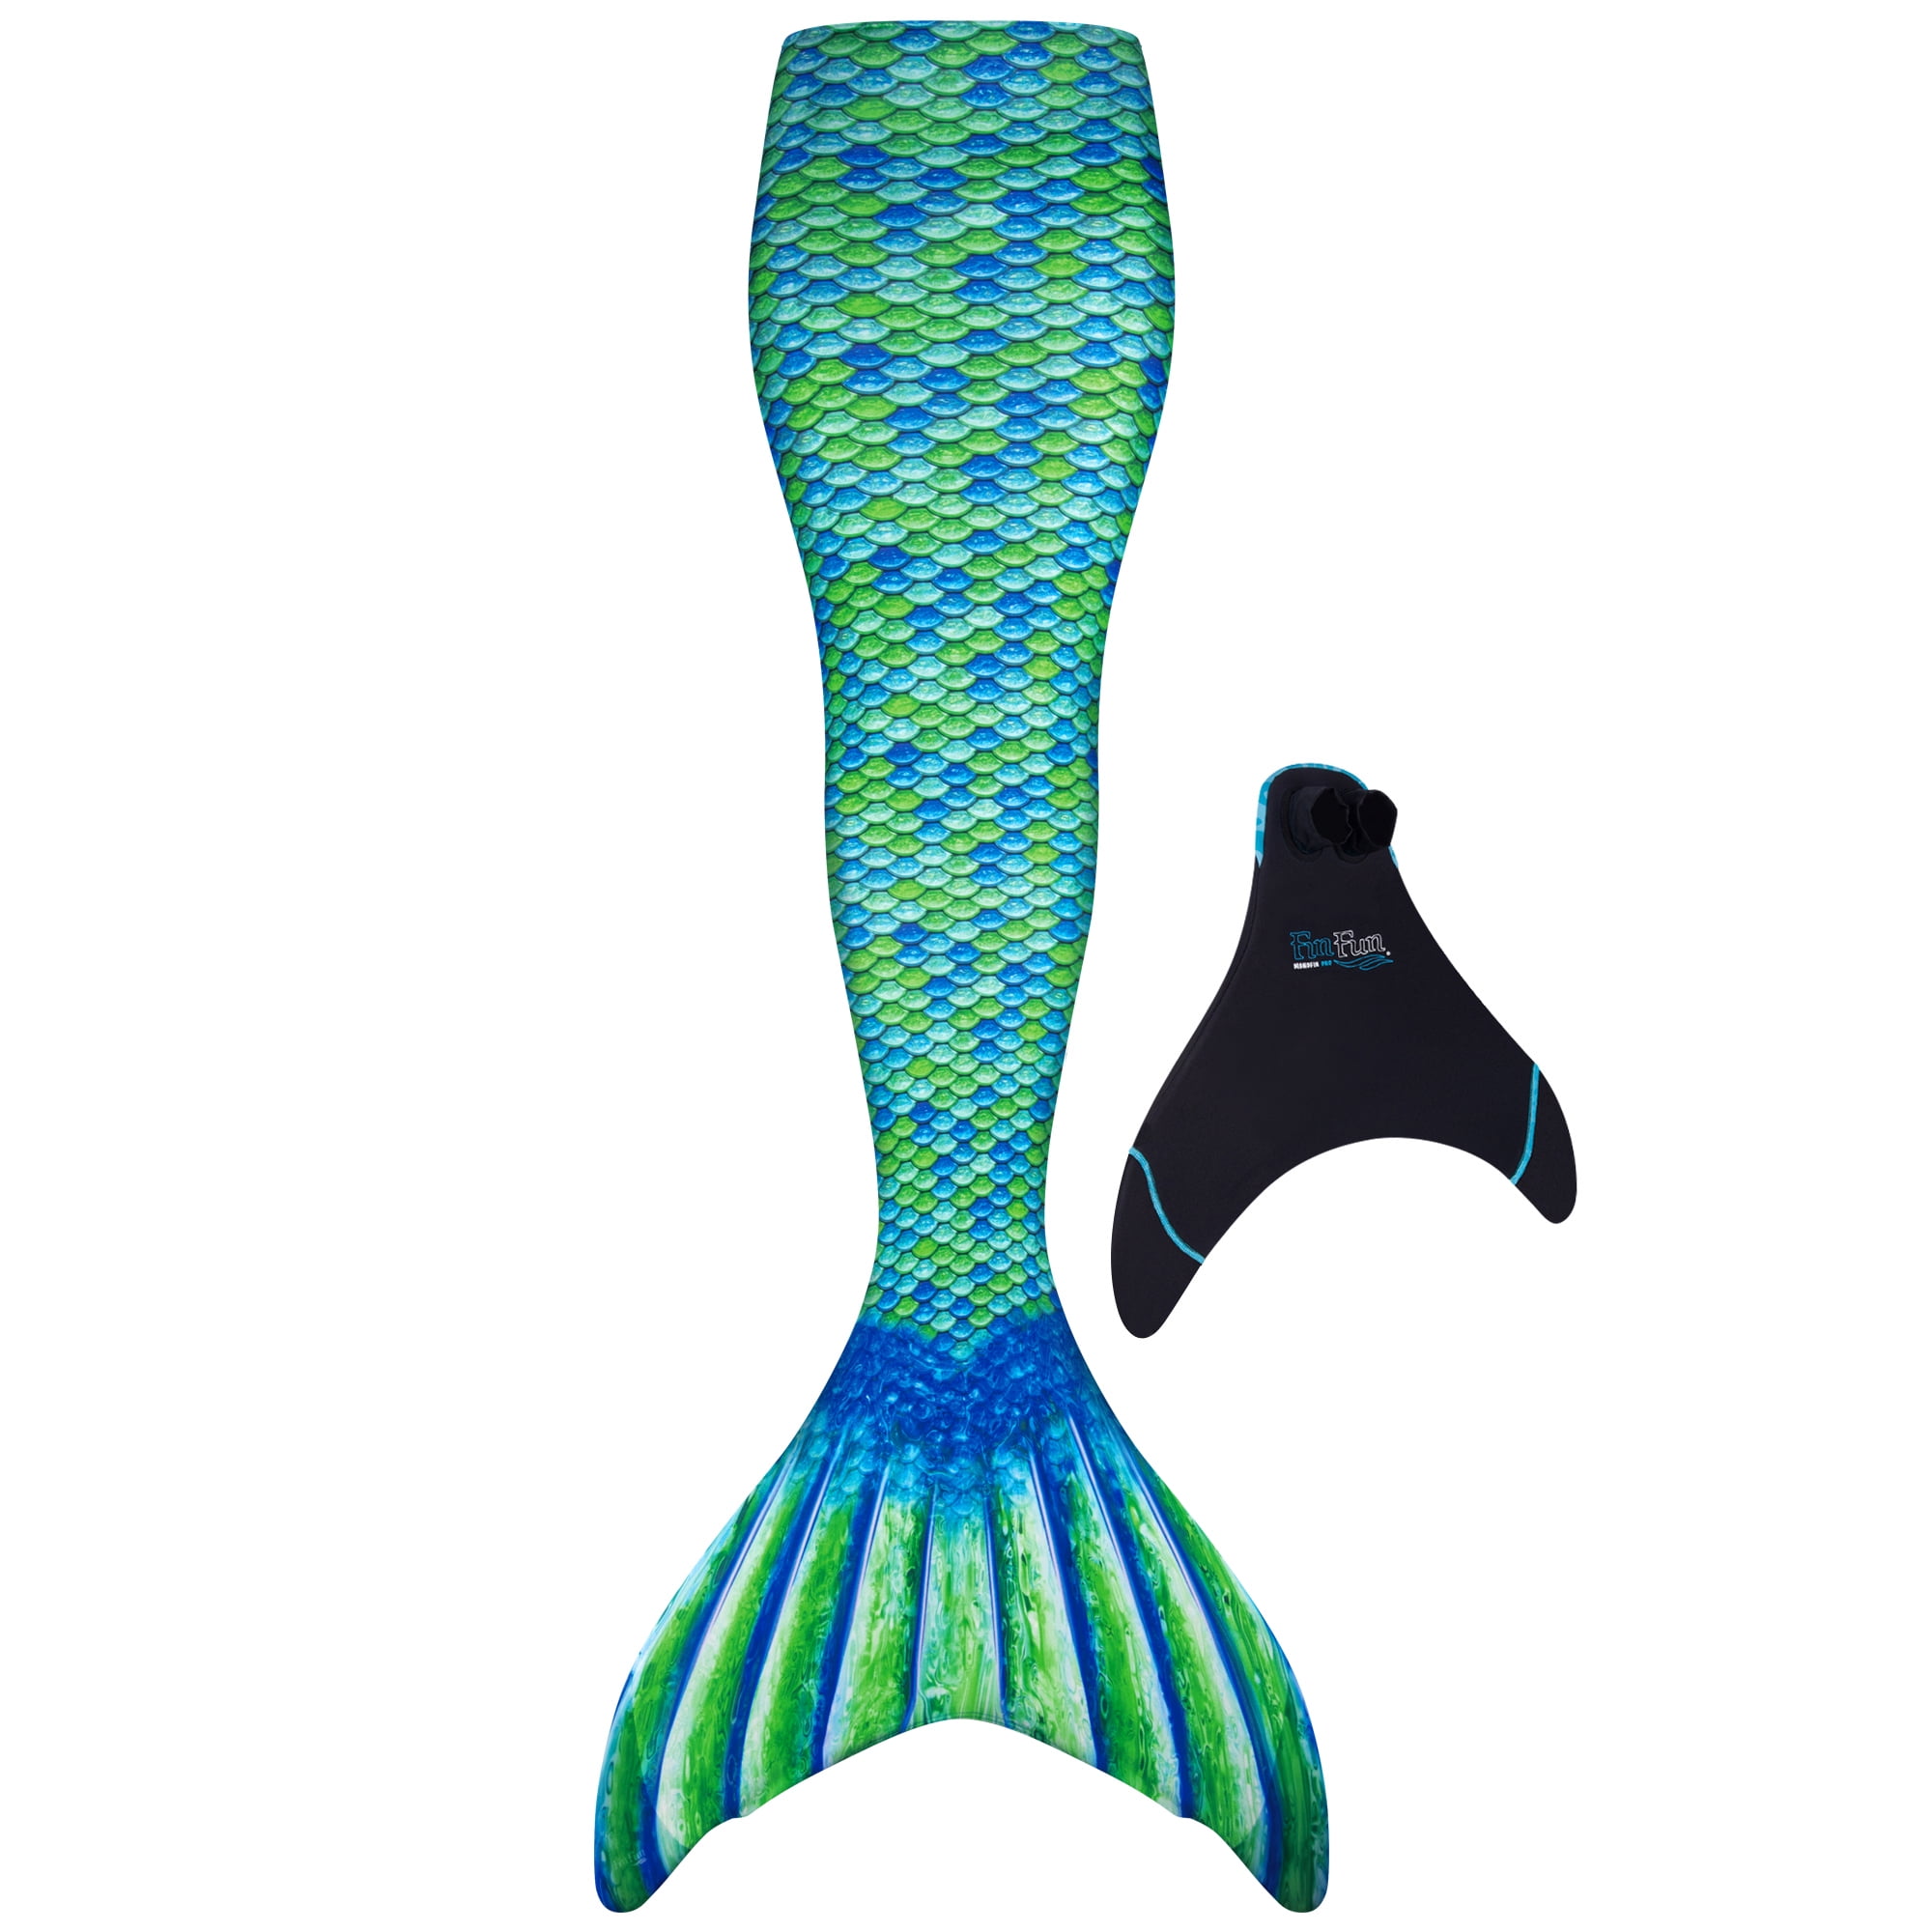 IOUTDOOR Monofins Swim Fins Mermaid Tail for Swimming with Monofins,Training Fins Fast Wear with Velcro Monofins for Kids Adult Girls Boys 